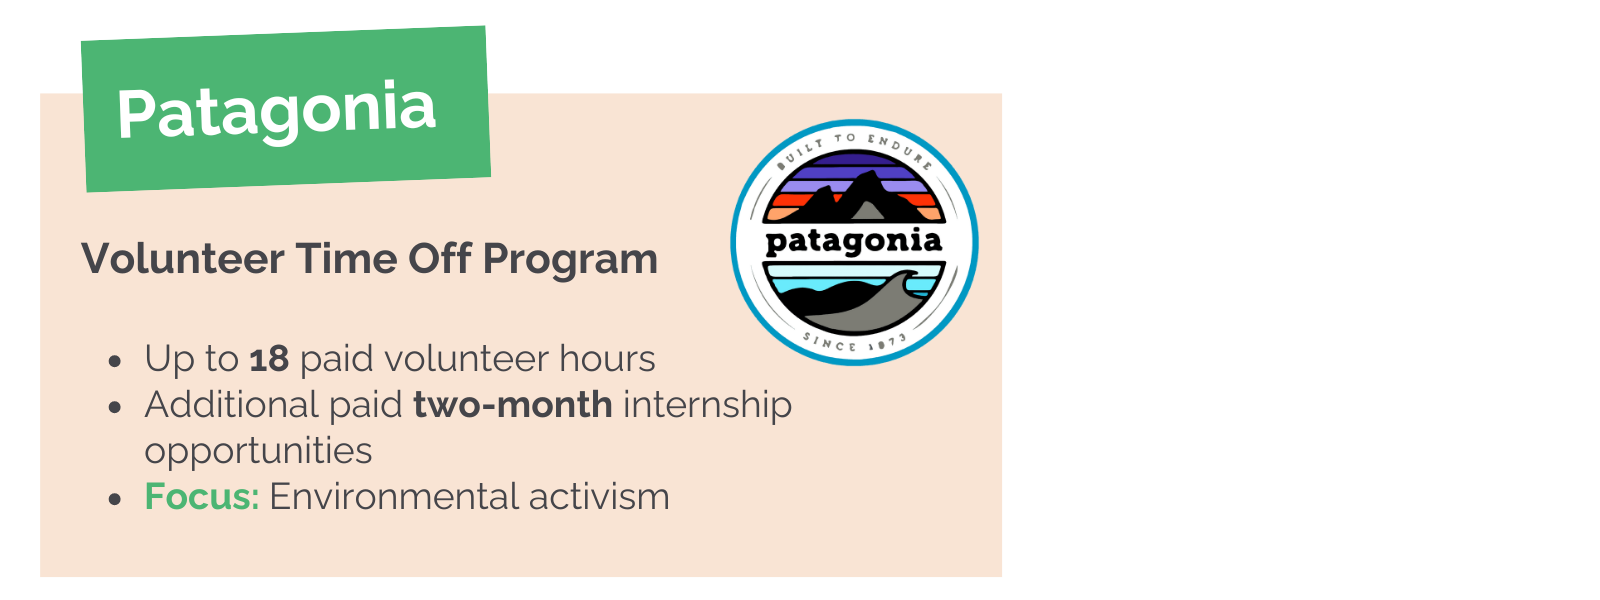 Patagonia offers paid volunteer time off programs for its employees.